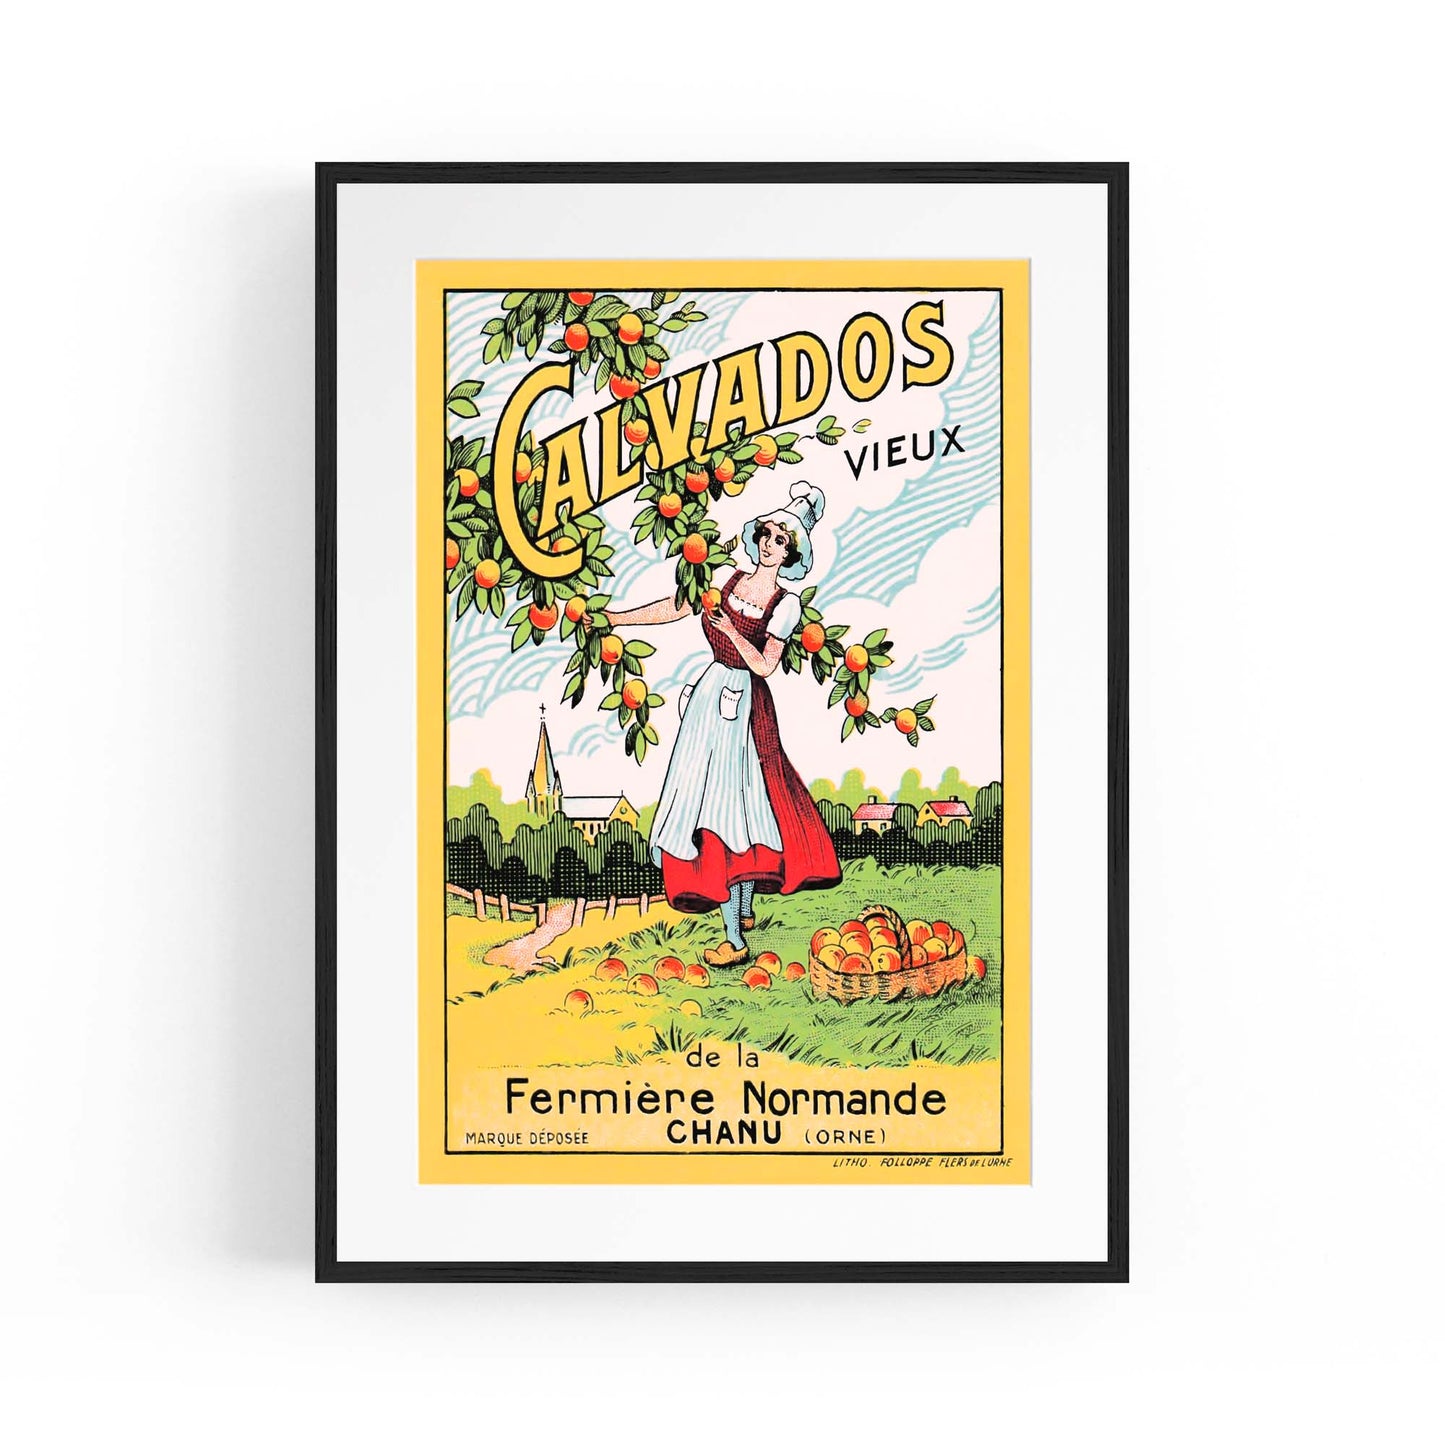 Old Calvados (Brandy) Vintage Drinks Advert Wall Art - The Affordable Art Company